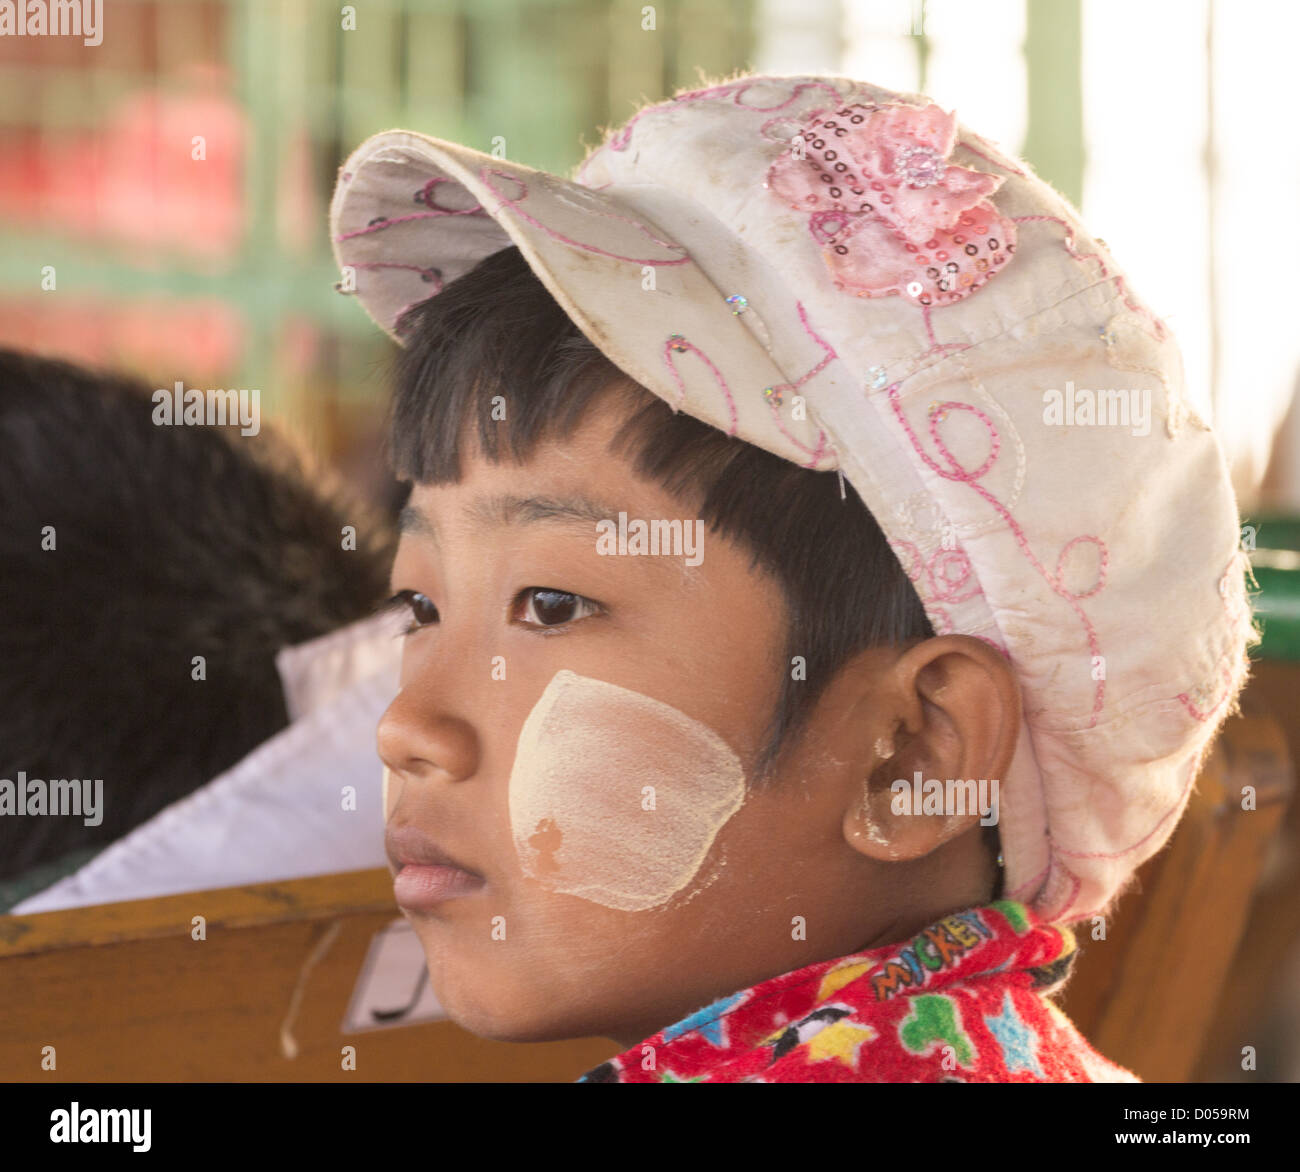 Girl With Tanaka On Her Face On The Ferry To Get To Mrauk U Most Stock Photo Alamy